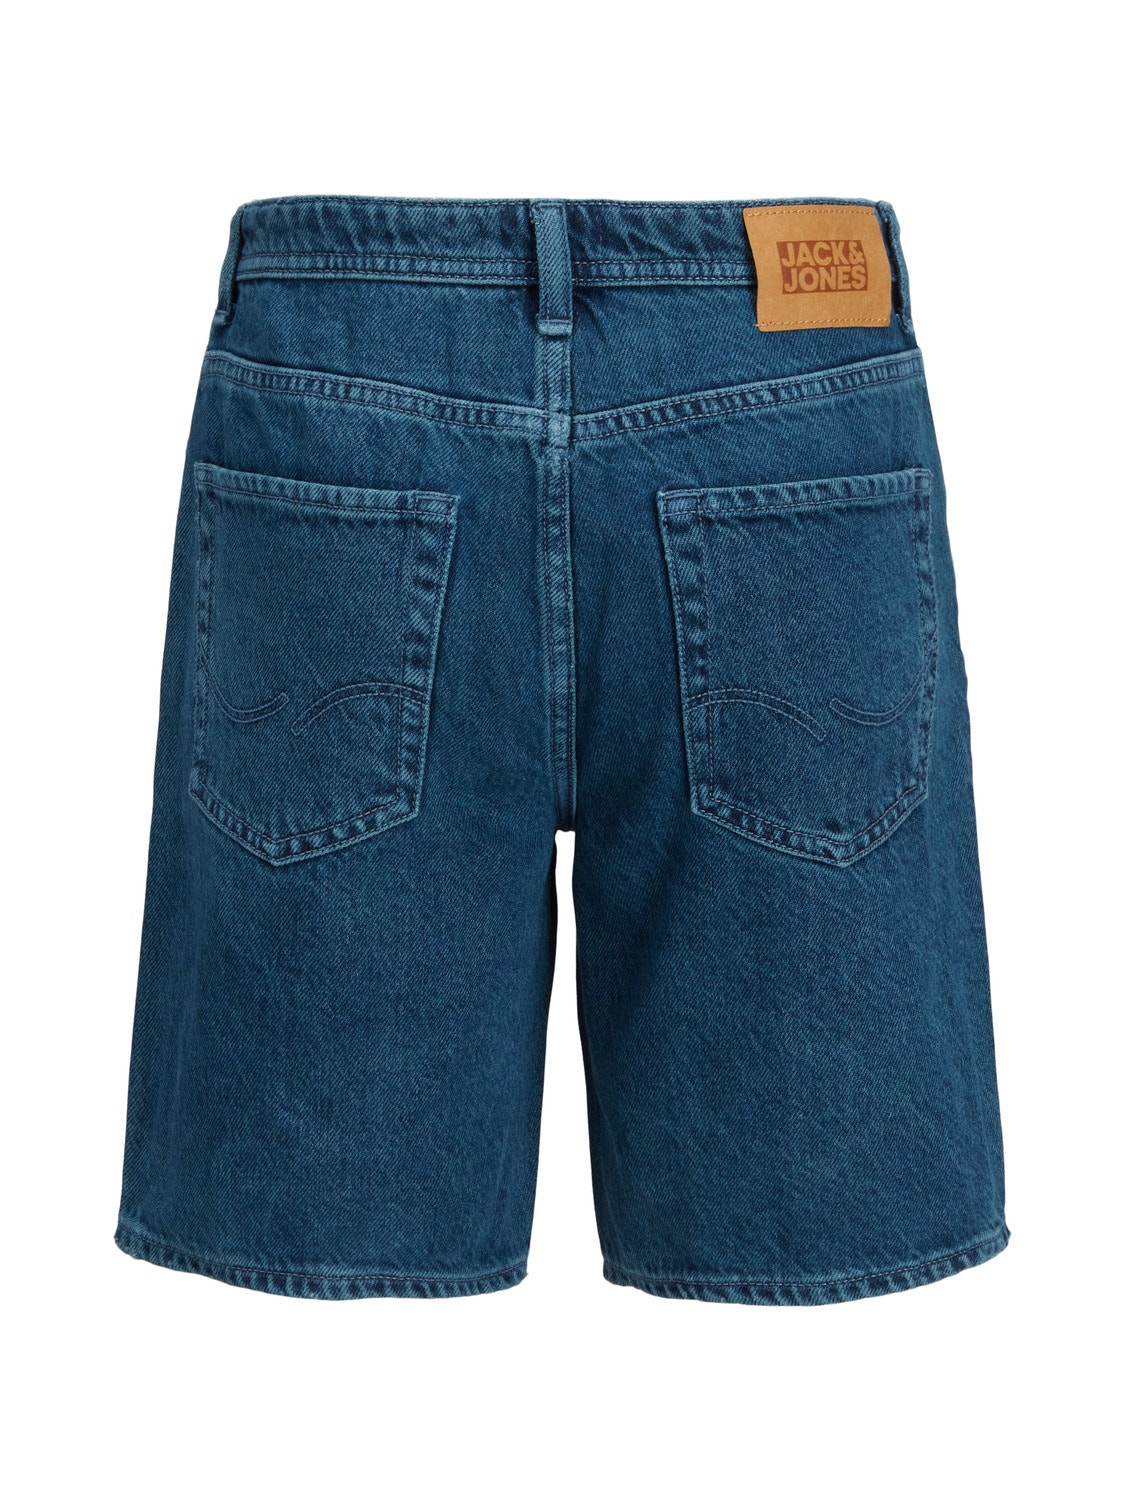 Jack & Jones Relaxed Fit Jeans Shorts Für jungs -Mineral Blue - 12210644